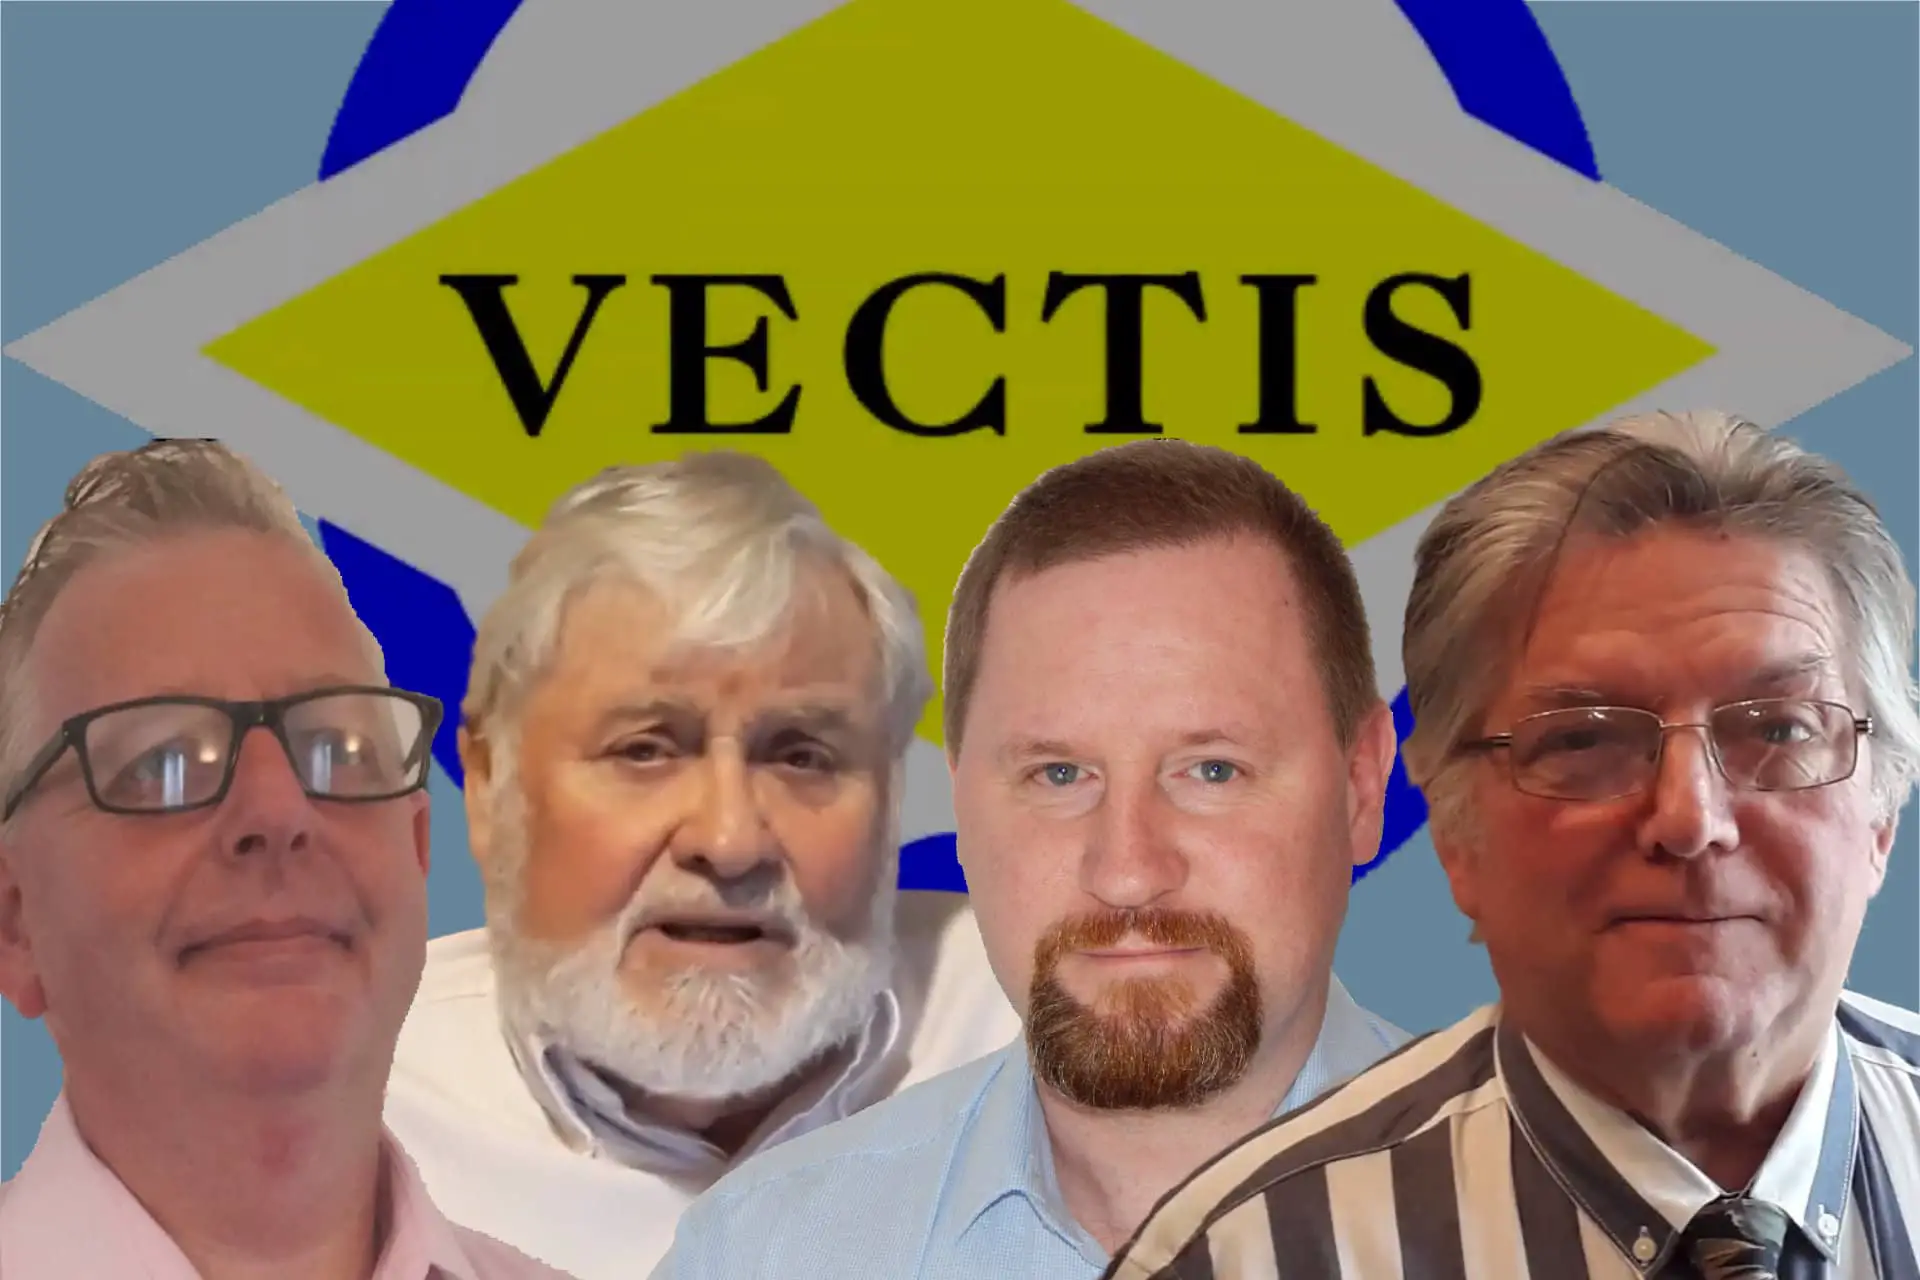 Photos of four people from the Vectis Party from their launch video